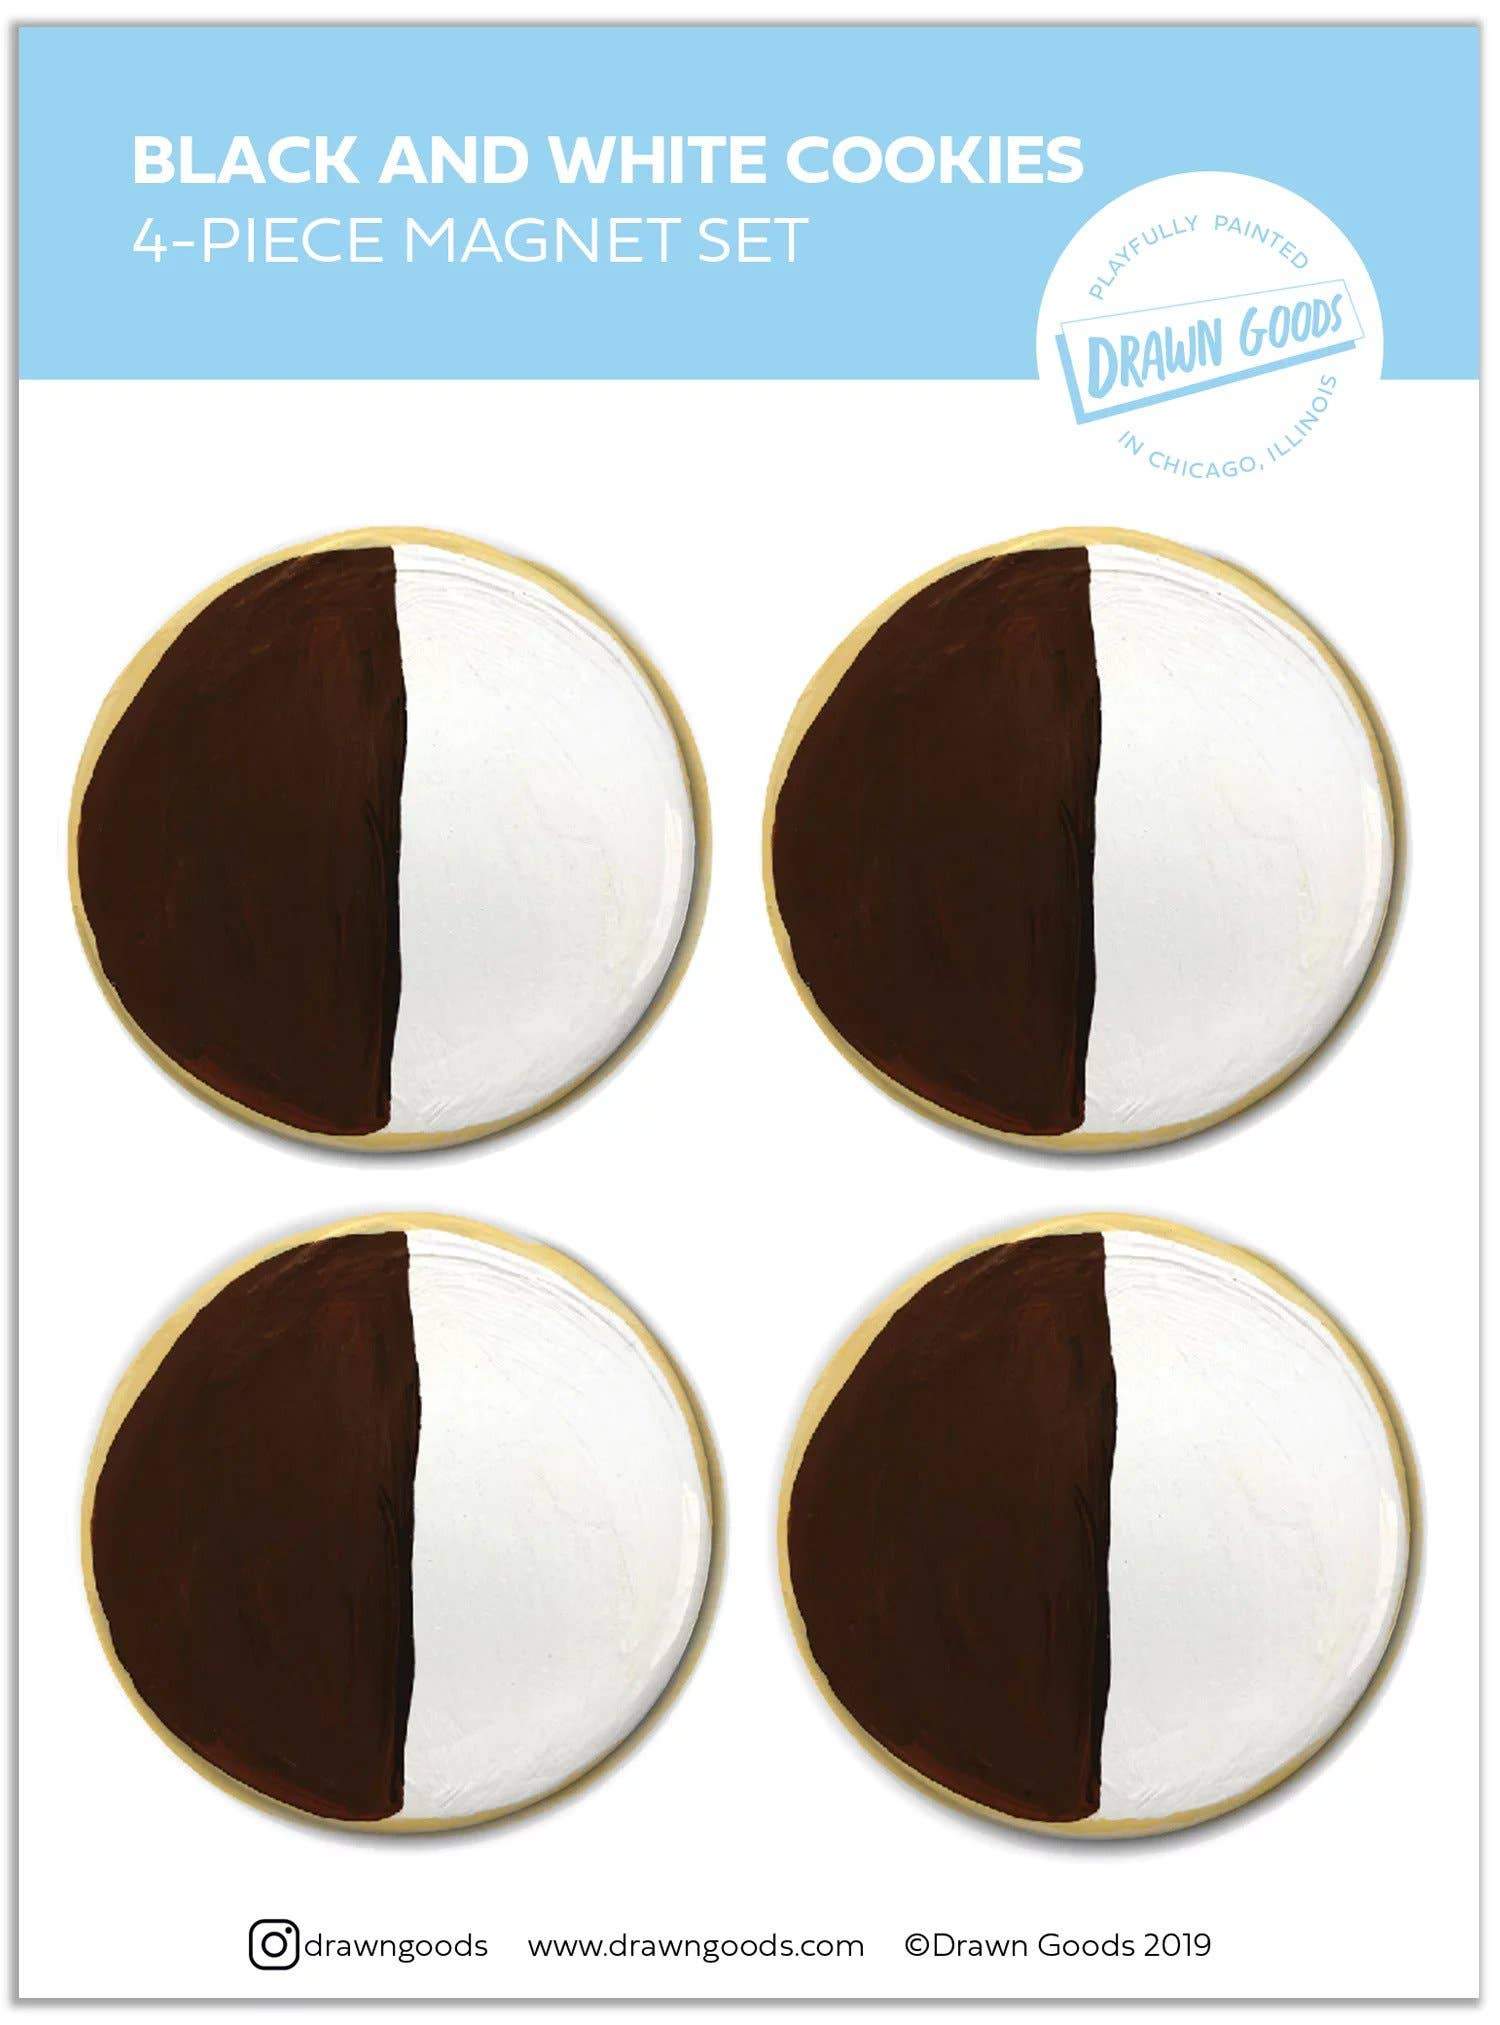 Drawn Goods Magnets Default Black and White Cookie Magnet Set